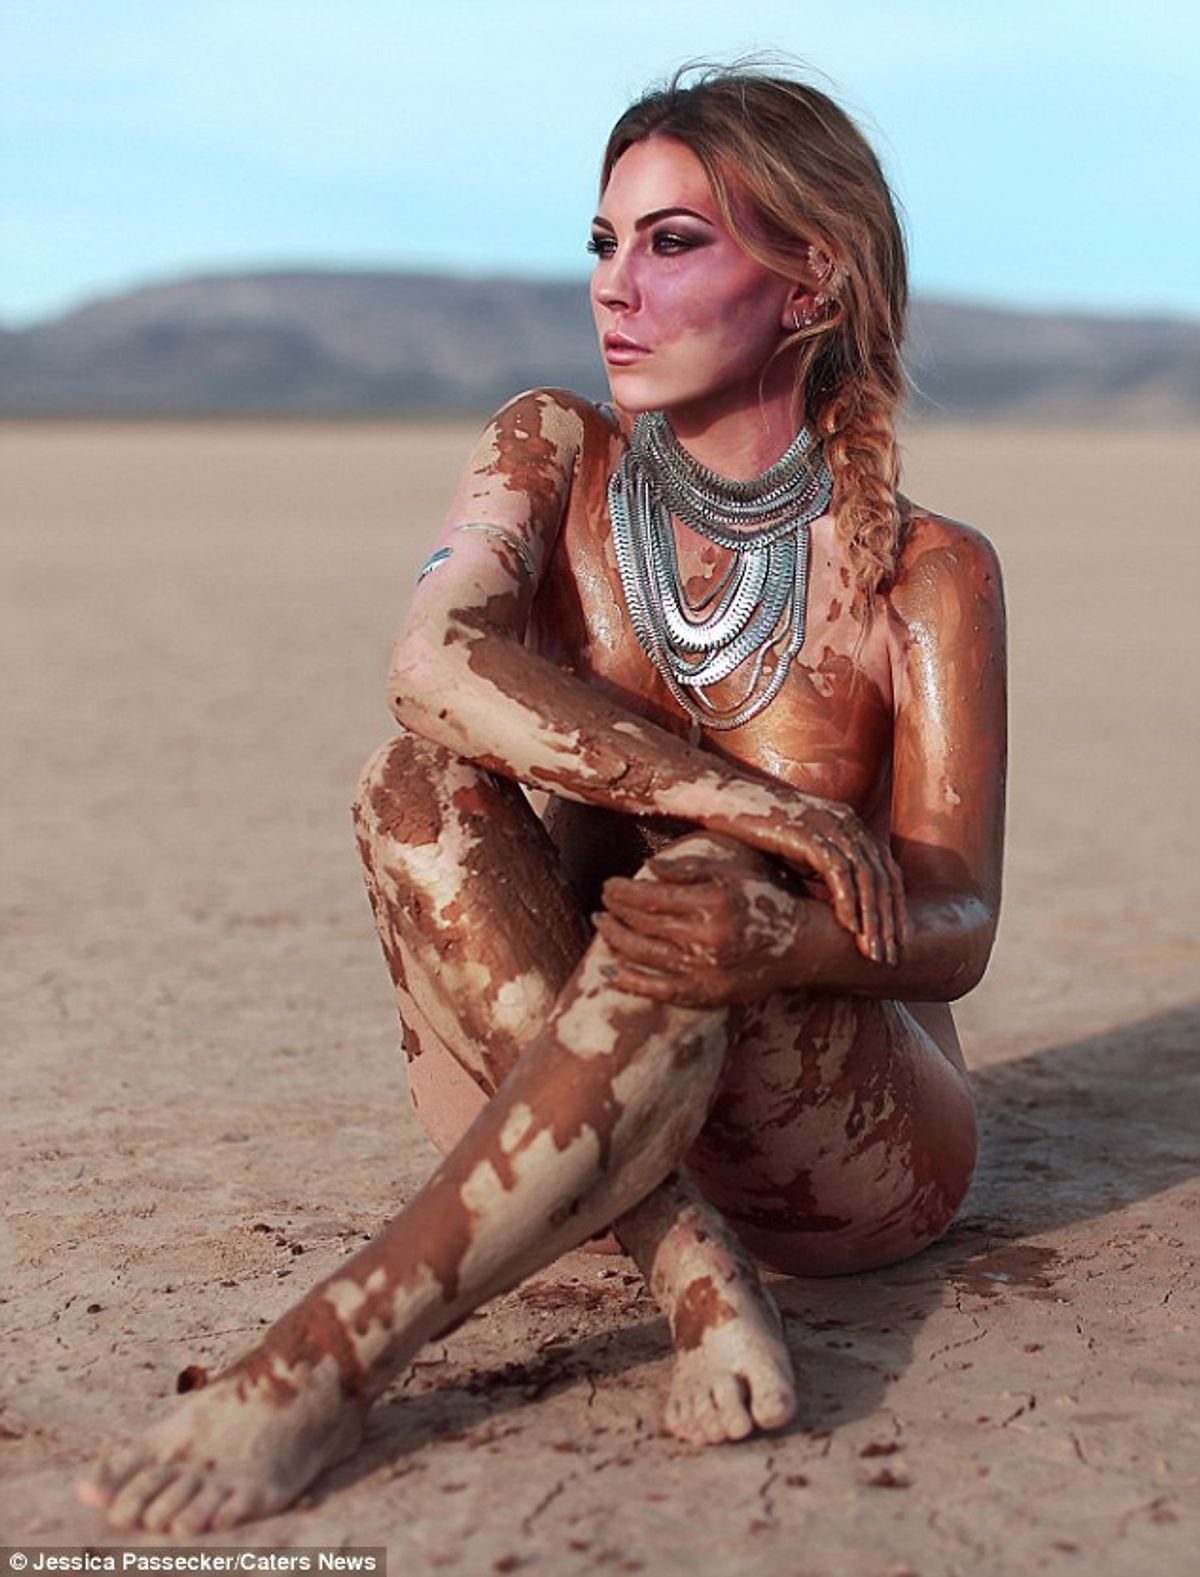 Actress Paige Billiot Creates Photography Project (And Poses Nude) To Celebrate Flaws